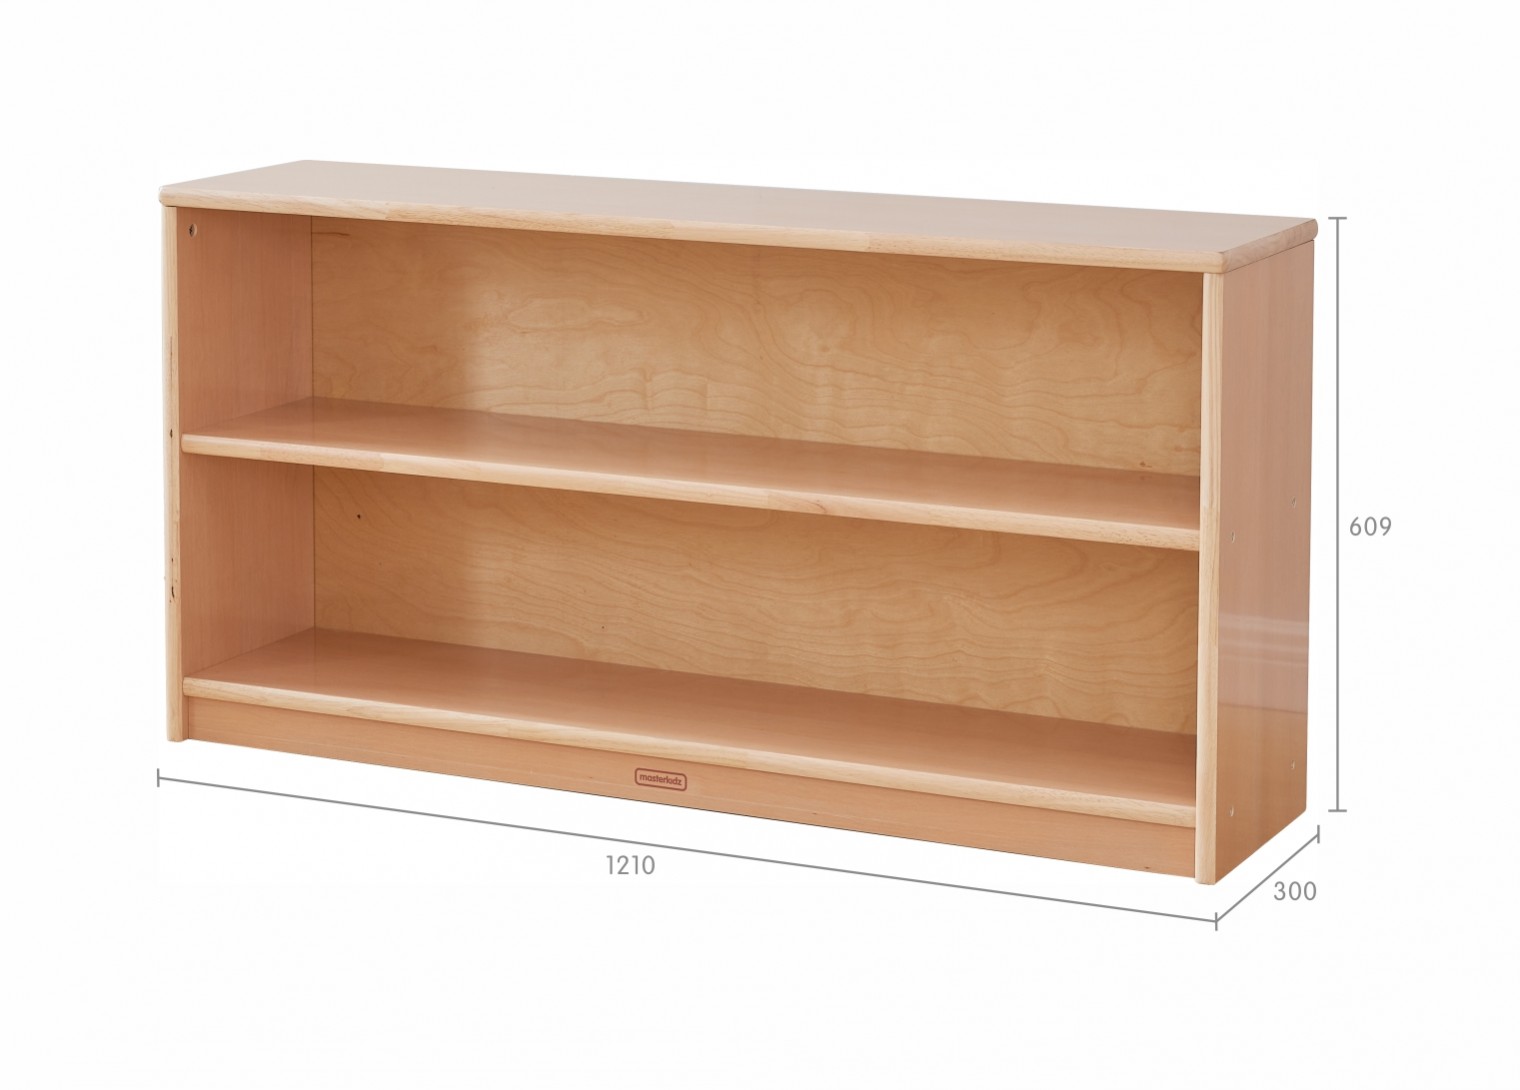 Forest School - 609H x 1210L Wooden  Shelving Unit - Plywood Back